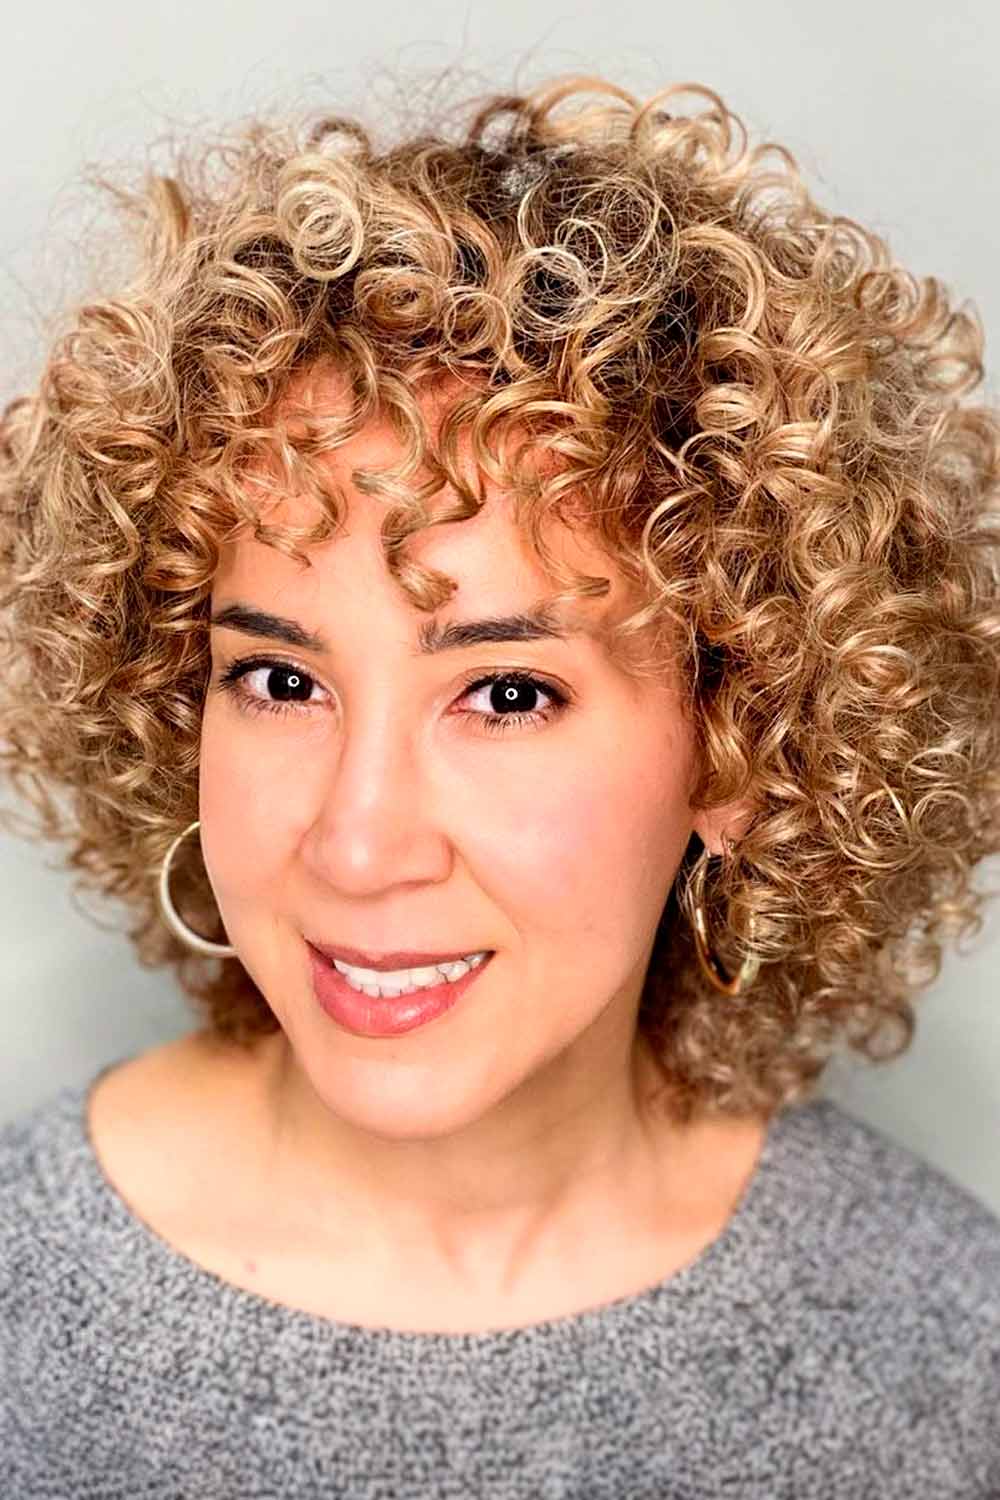 Short Messy Curly Bob With Bangs #curlybob #haircuts #bobhaircuts #curlyhairstyles